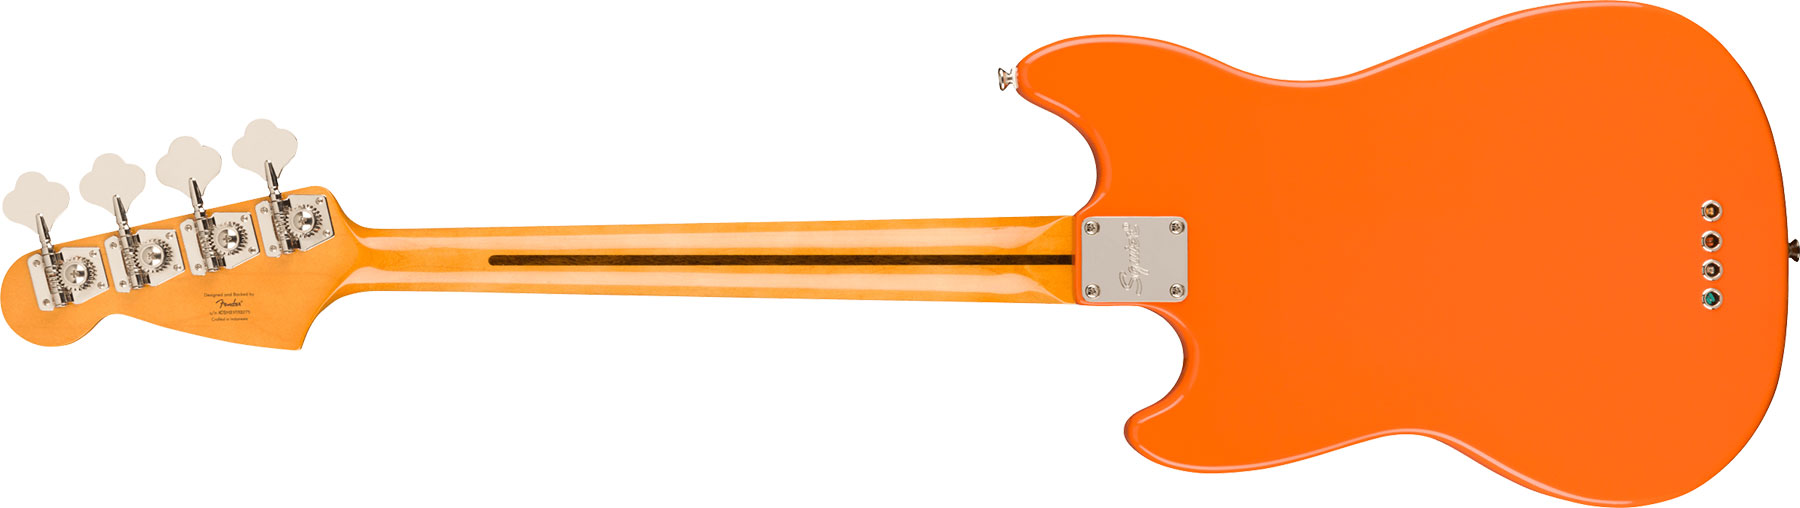 Squier Mustang Bass '60s Classic Vibe Competition Fsr Ltd Lau - Capri Orange - Solid body electric bass - Variation 1